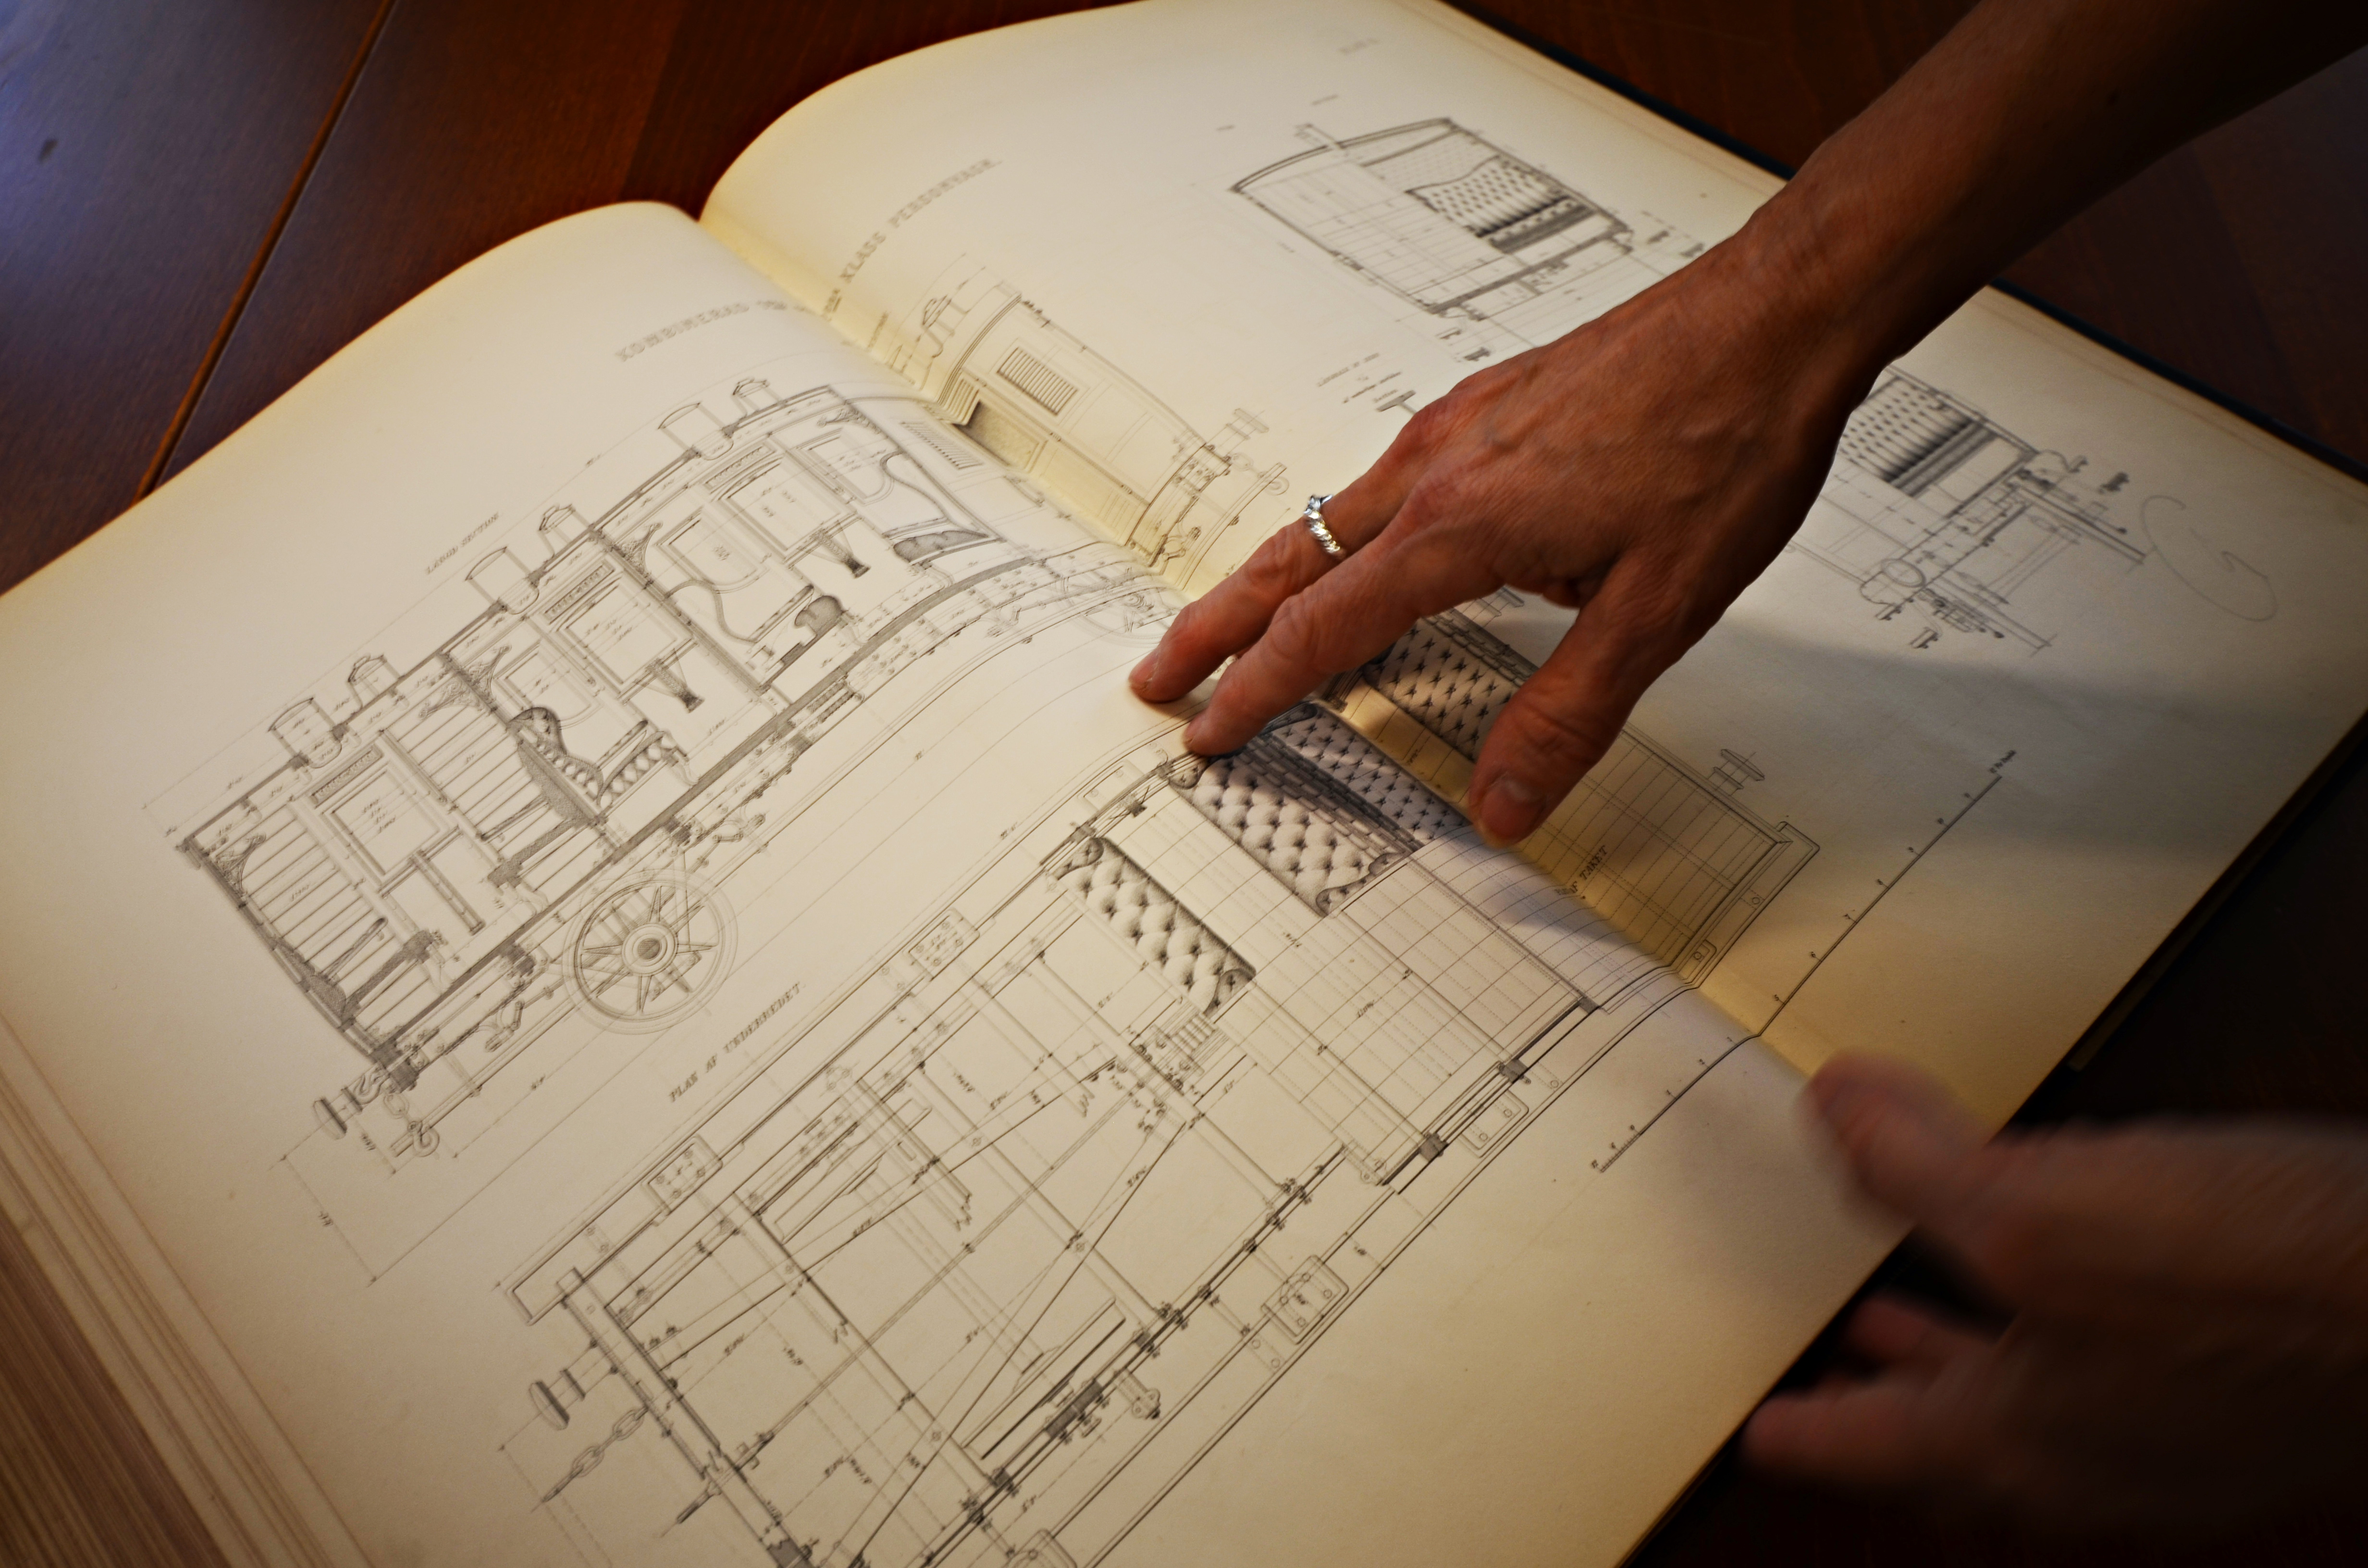 A close-up of an open hardcover book with drawings with one hand holding down the spread.